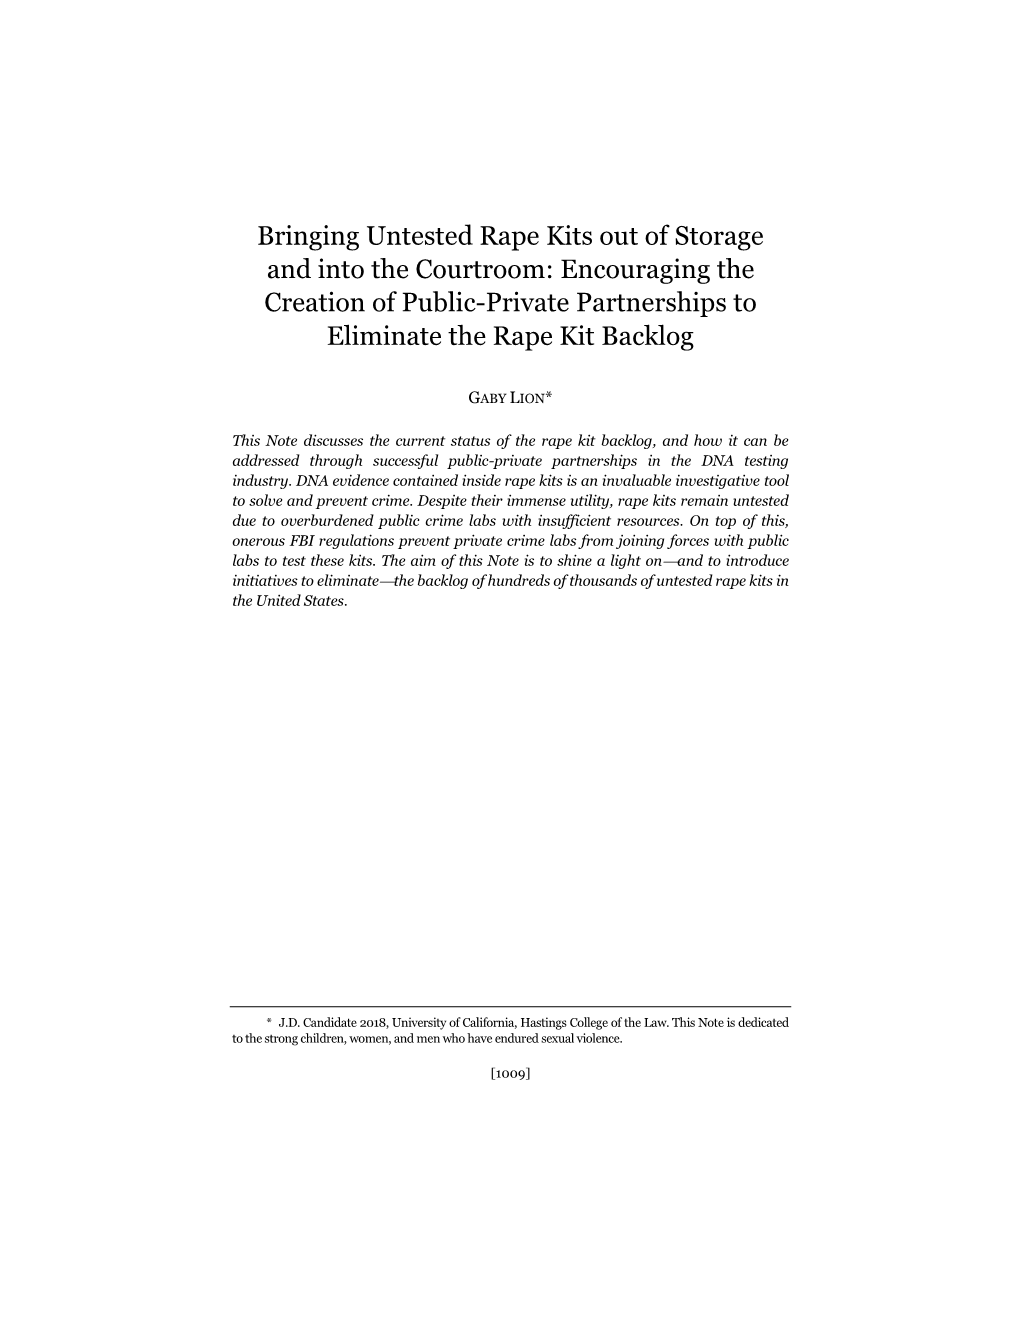 Bringing Untested Rape Kits out of Storage and Into the Courtroom: Encouraging the Creation of Public-Private Partnerships to Eliminate the Rape Kit Backlog